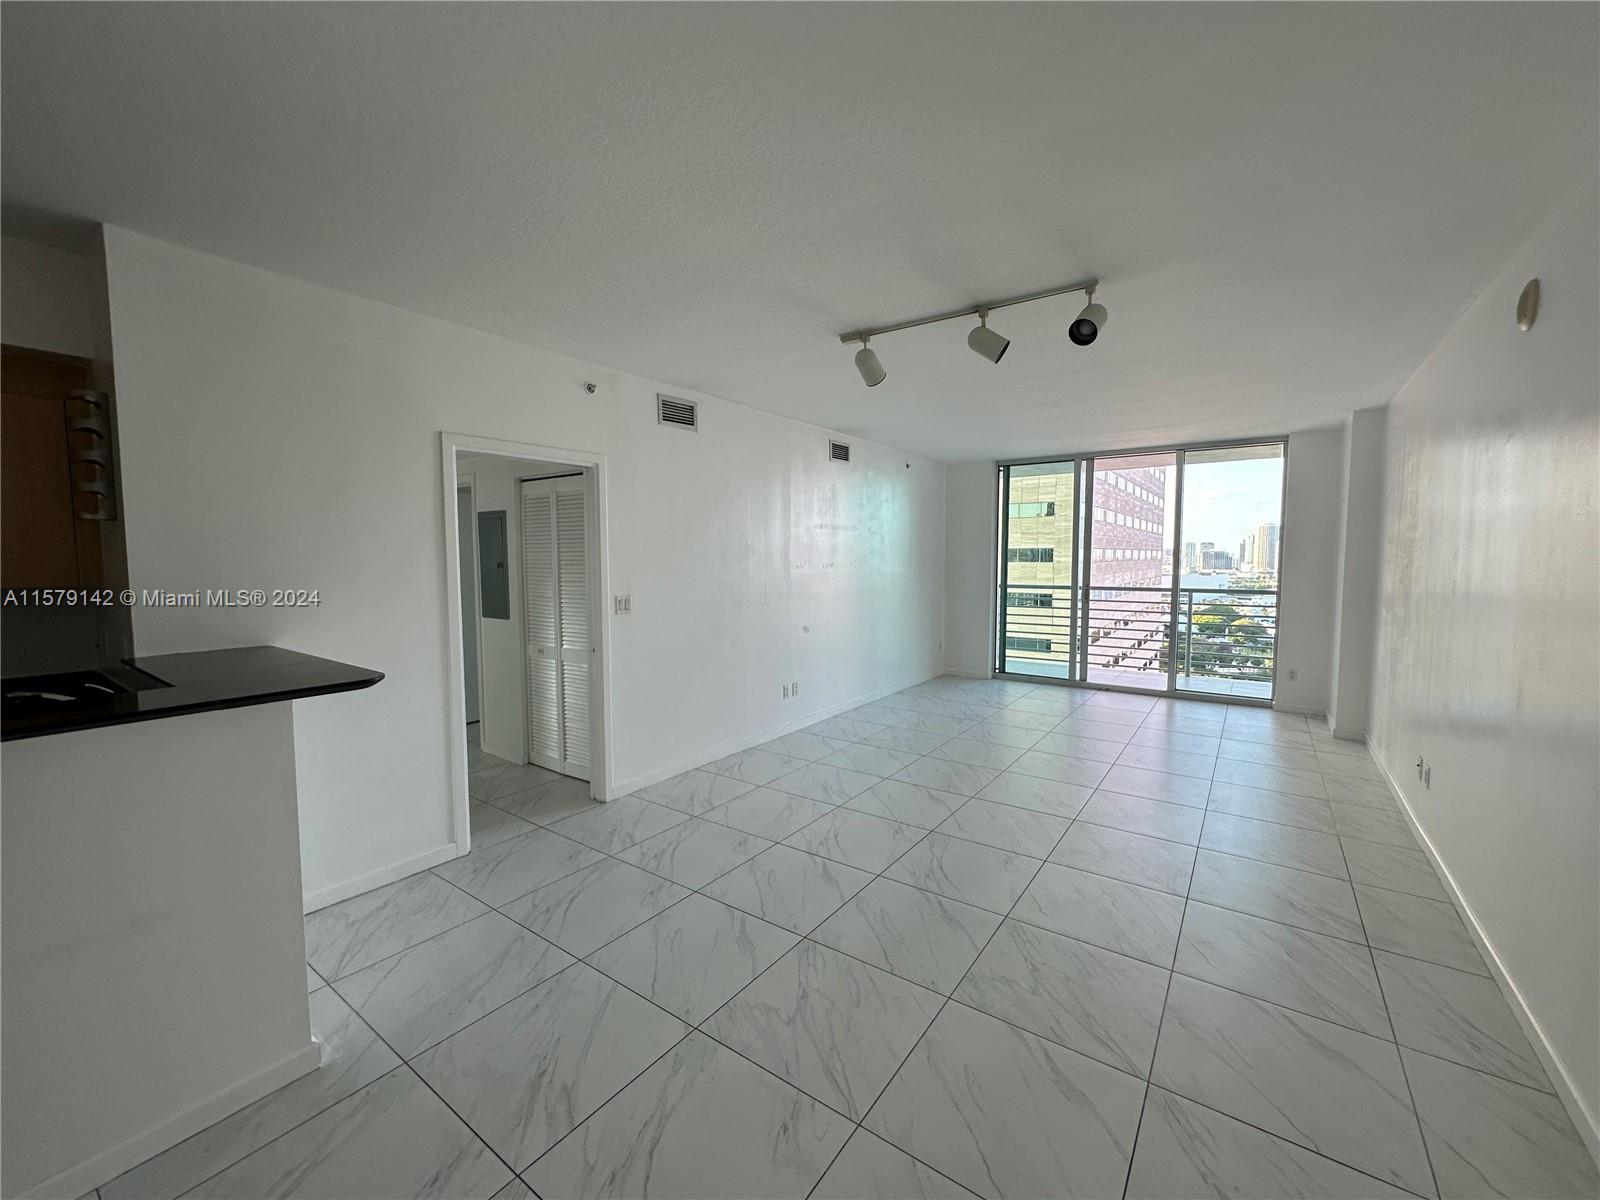 Stunning 2 bedroom 2 bathroom condo with breathtaking views of the Biscayne Bay and Bayfront Park. Corner unit with tile flooring,  resort style amenities, 24 hour valet, concierge, 2 pools, 2 state of the art fitness centers, on-site dry cleaning, Bayfront Café, and more. Minutes away from Brickell Ave, Miami Arena, Miami International Airport & SOBE